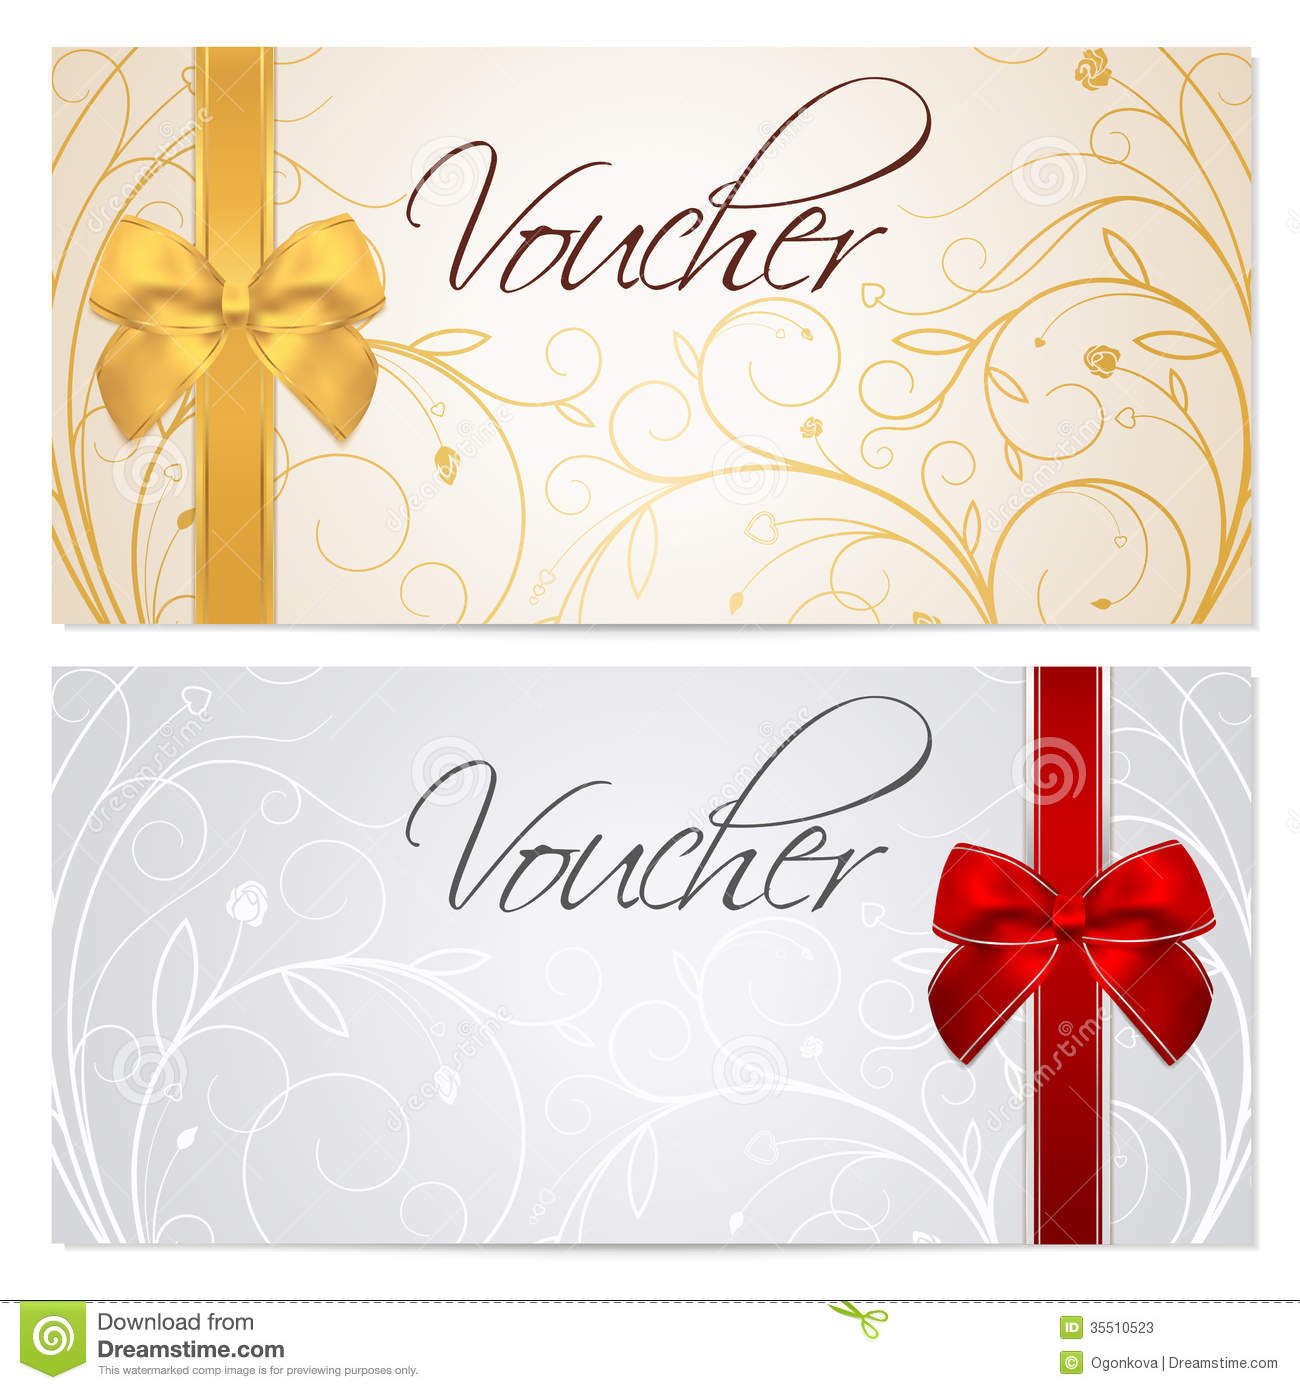 Voucher (Gift Certificate, Coupon) Template